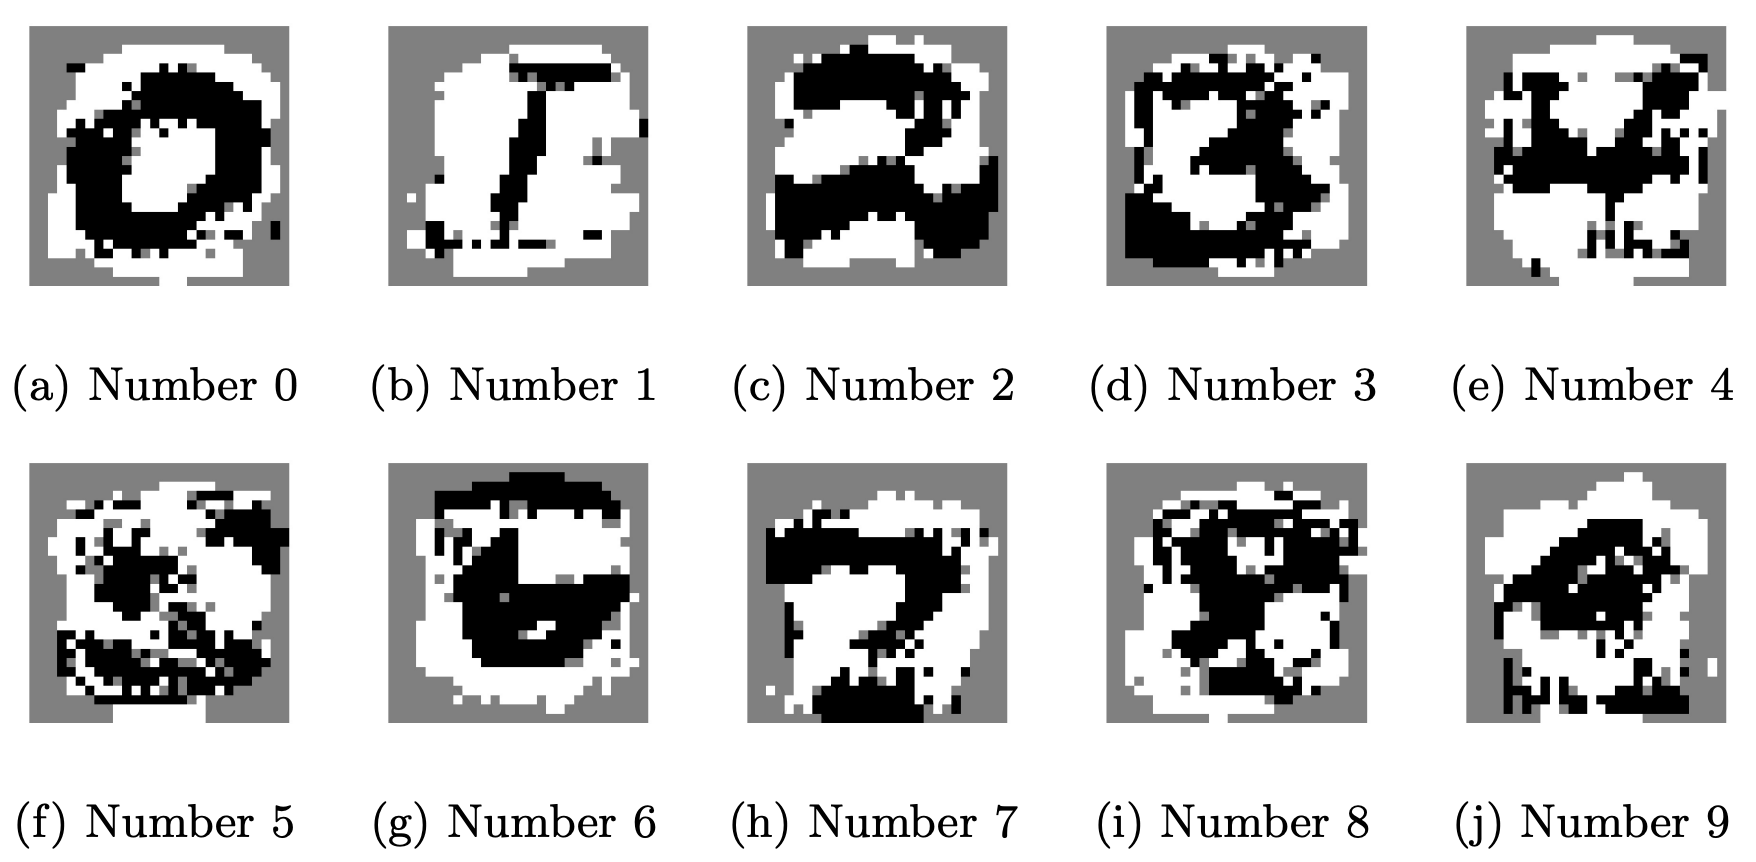  Visualization of interpretability results for MNIST (from paper [1]) over each number 1, . . . , 9. A pixel is colored to: black if the learned weight has a value 1, white if the learned weight has a value -1, and gray otherwise. Intuitively, each subfigure visualizes what the learned model predicts each number to look like (and not to look like) based on its learned weights.